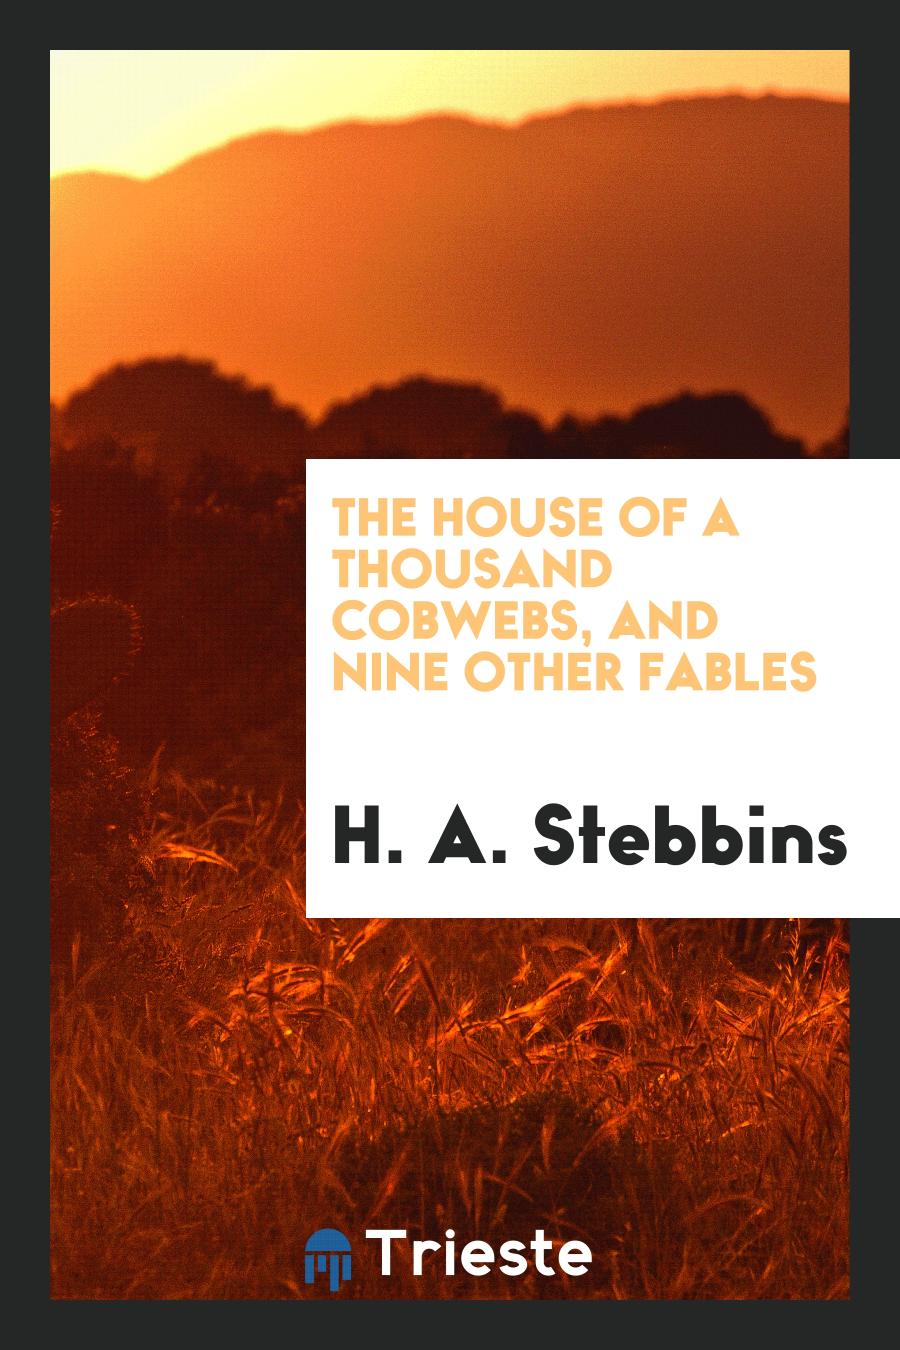 The House of a Thousand Cobwebs, and Nine Other Fables